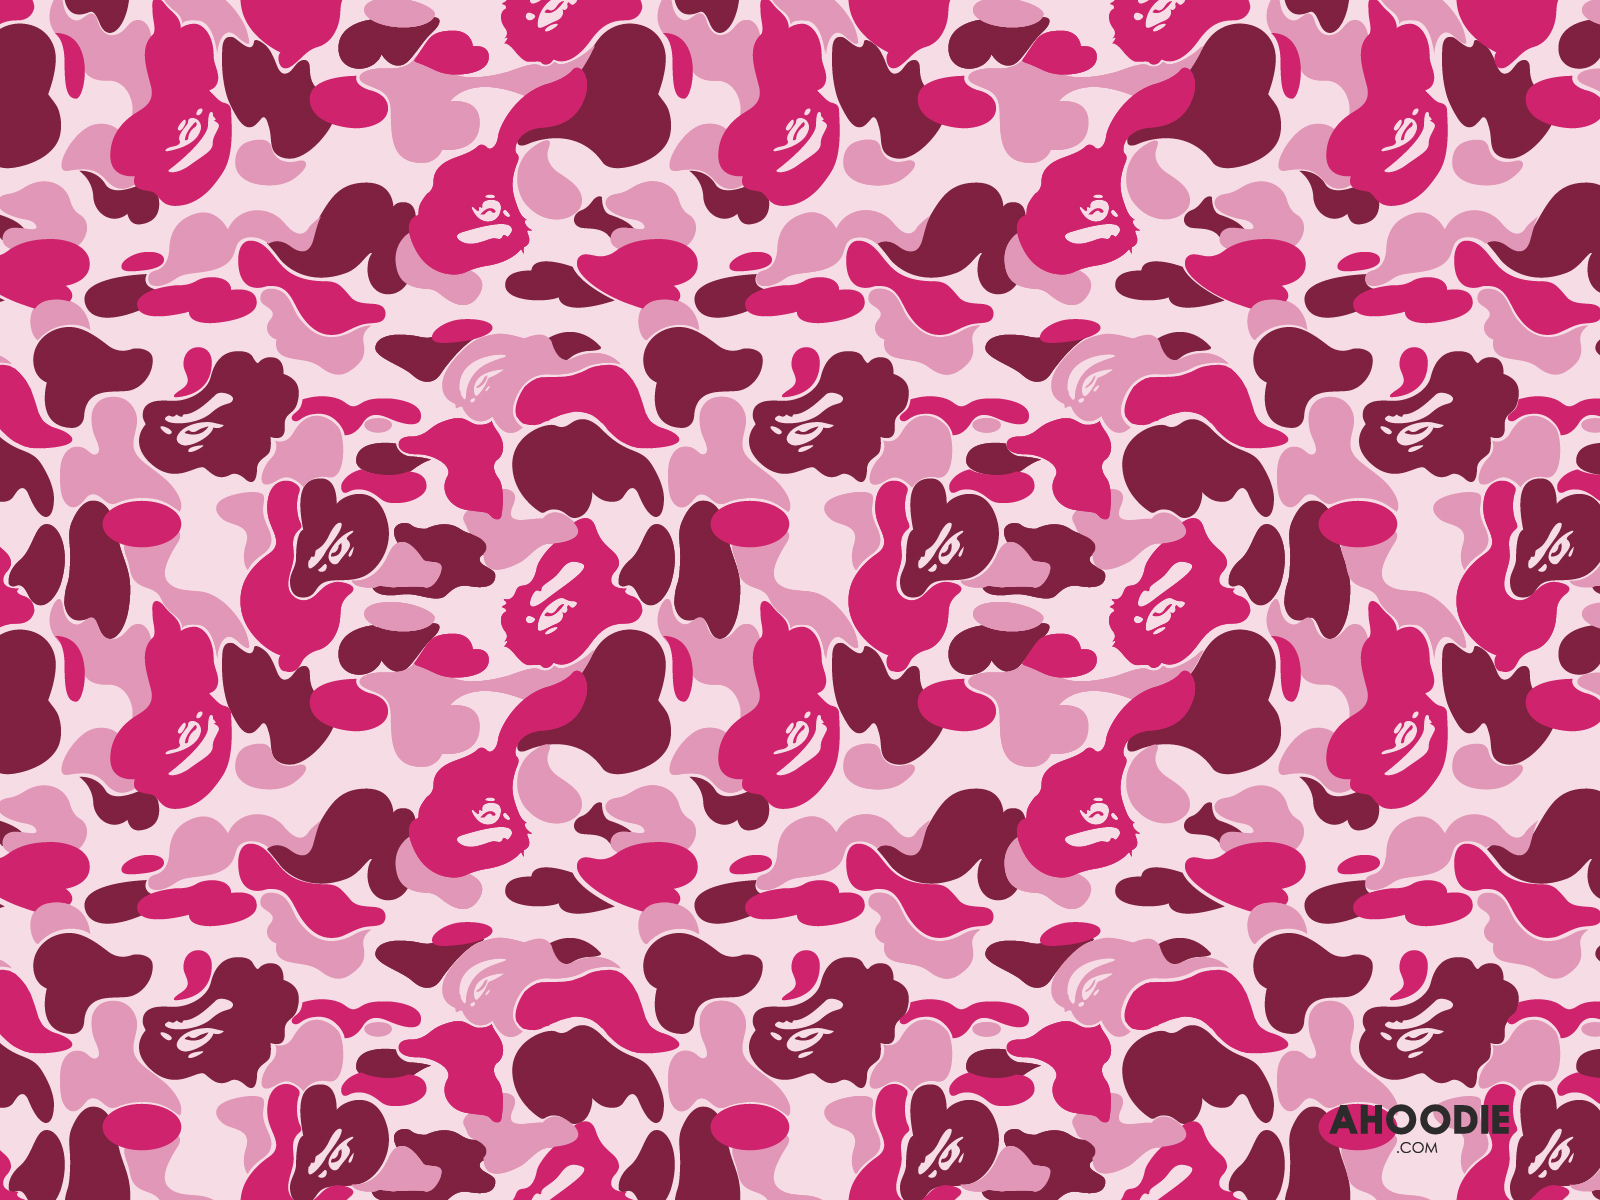 camouflage wallpaper hd pink